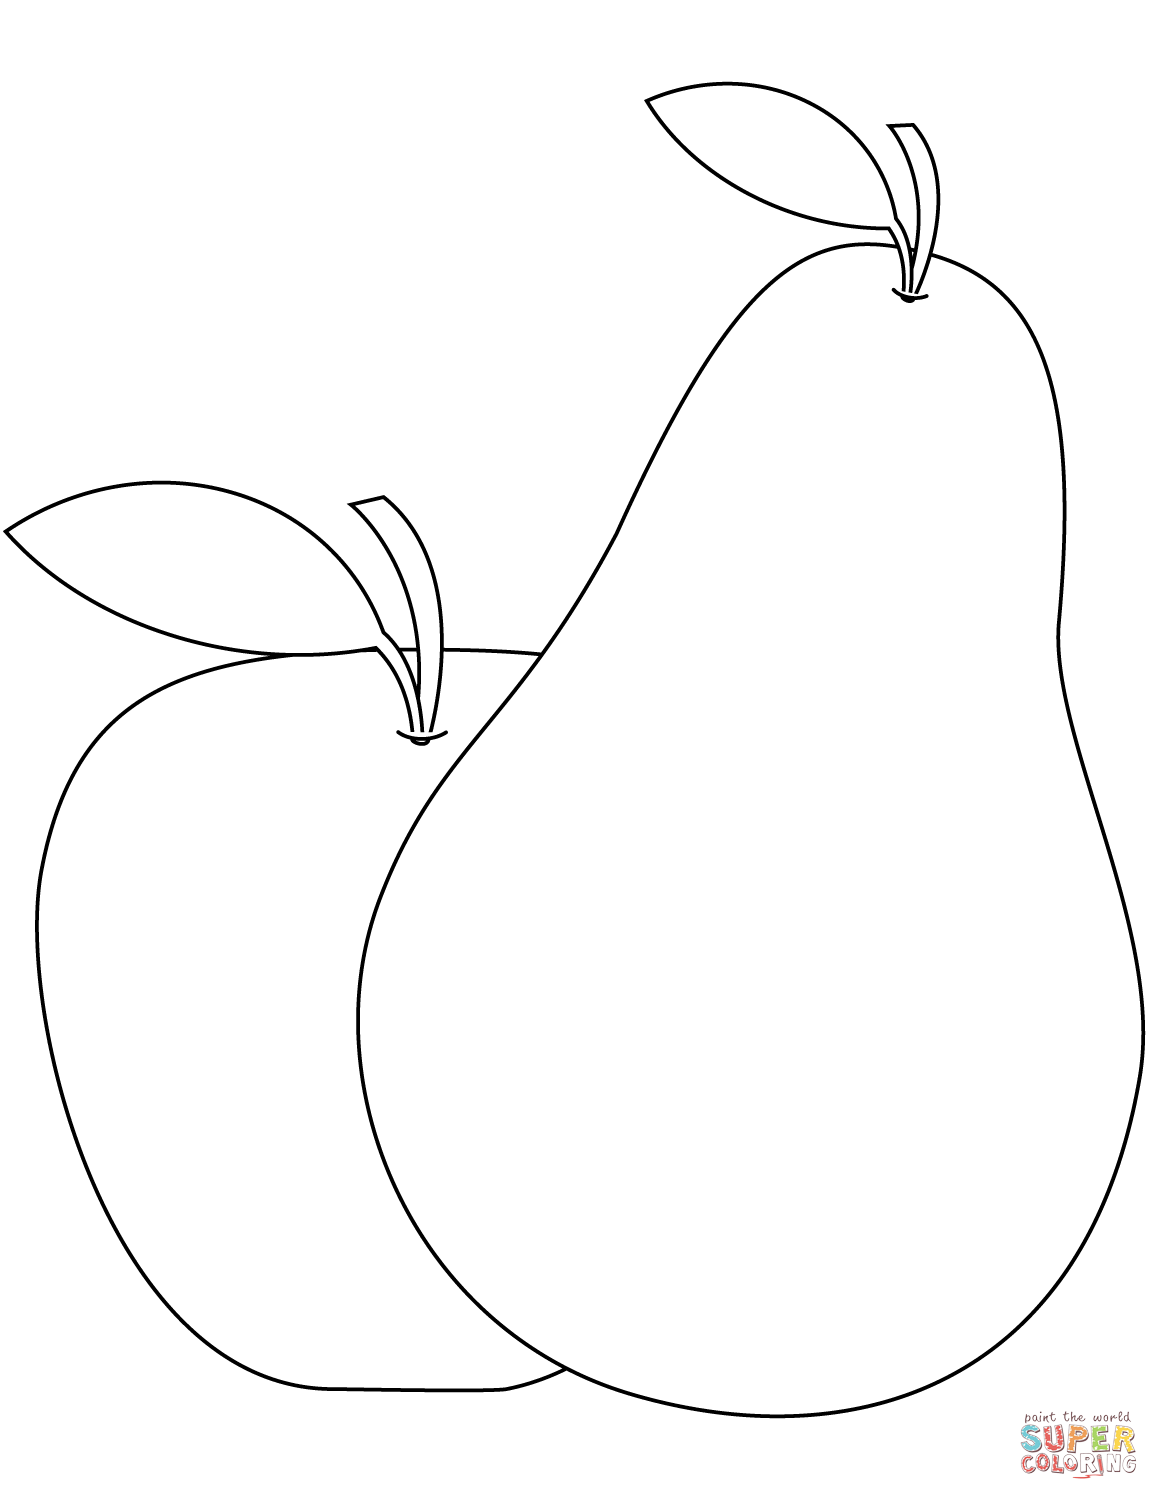 Pear and Apple coloring page | Free Printable Coloring Pages